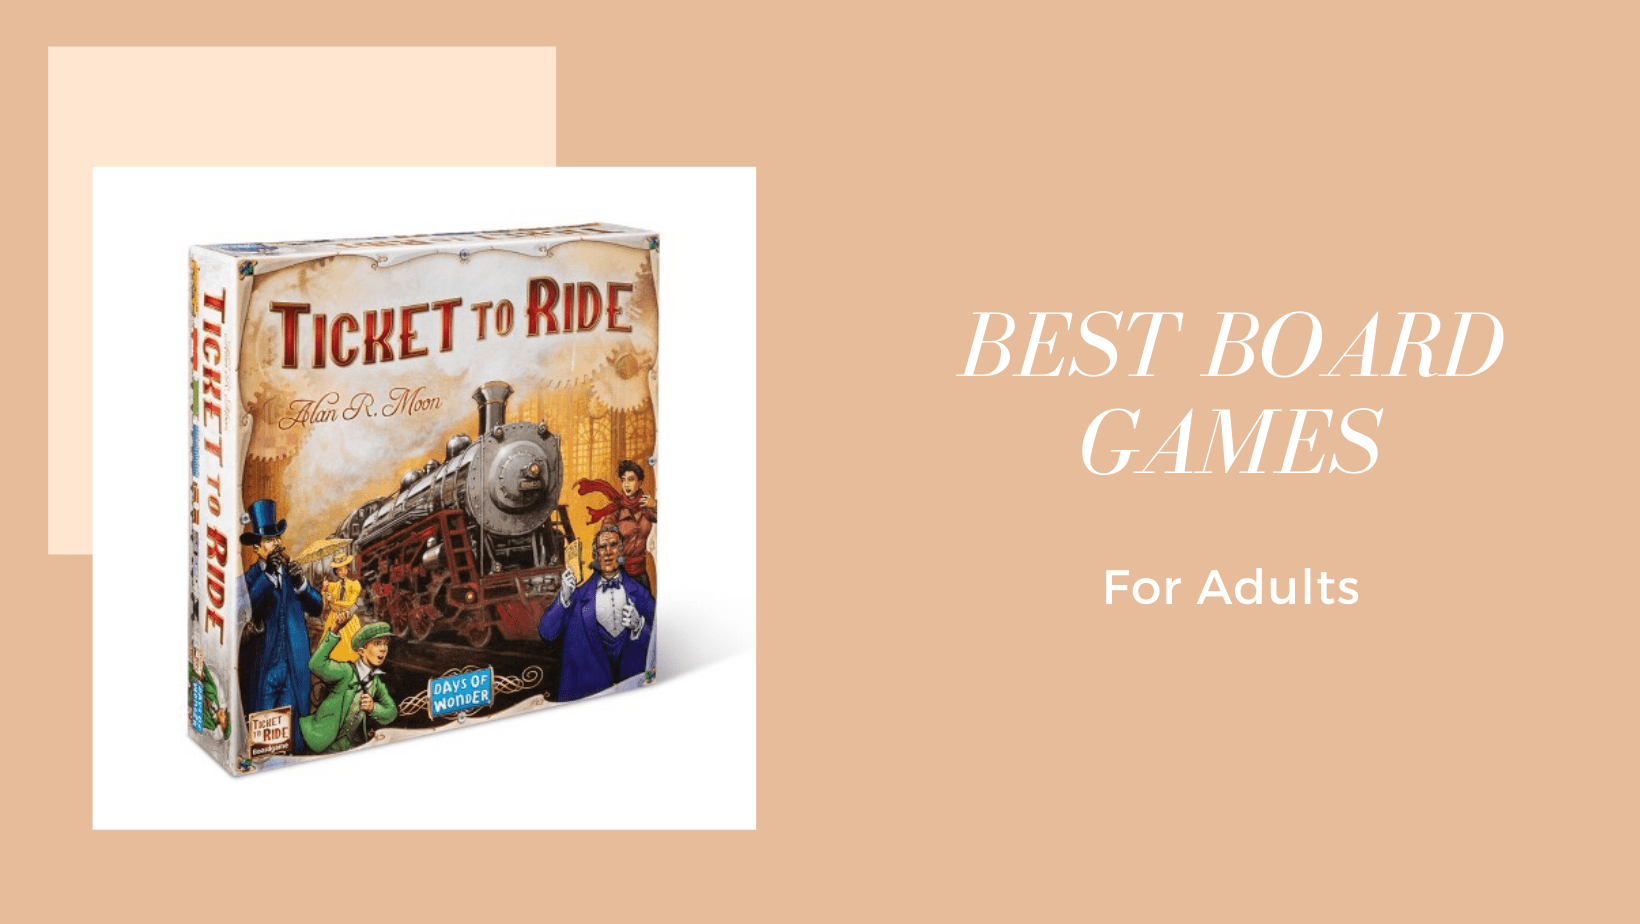 The board game Ticket to Ride as one of the best board games for adults.